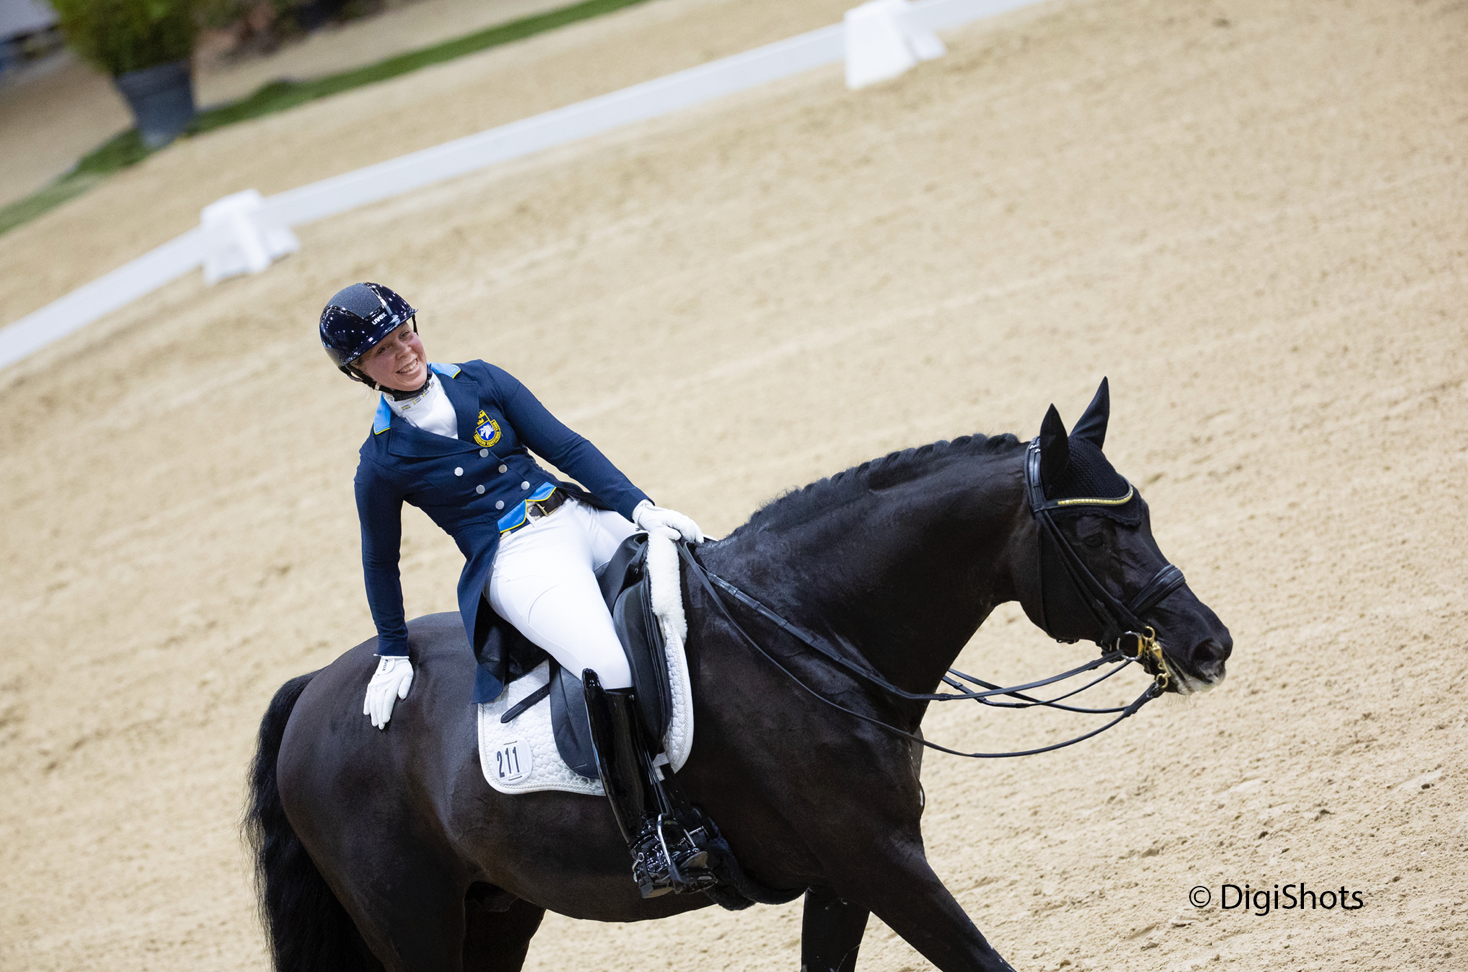 Therese Nilshagen wins CDI 4* Grand Prix Special: “Dante Weltino is my dreamhorse”